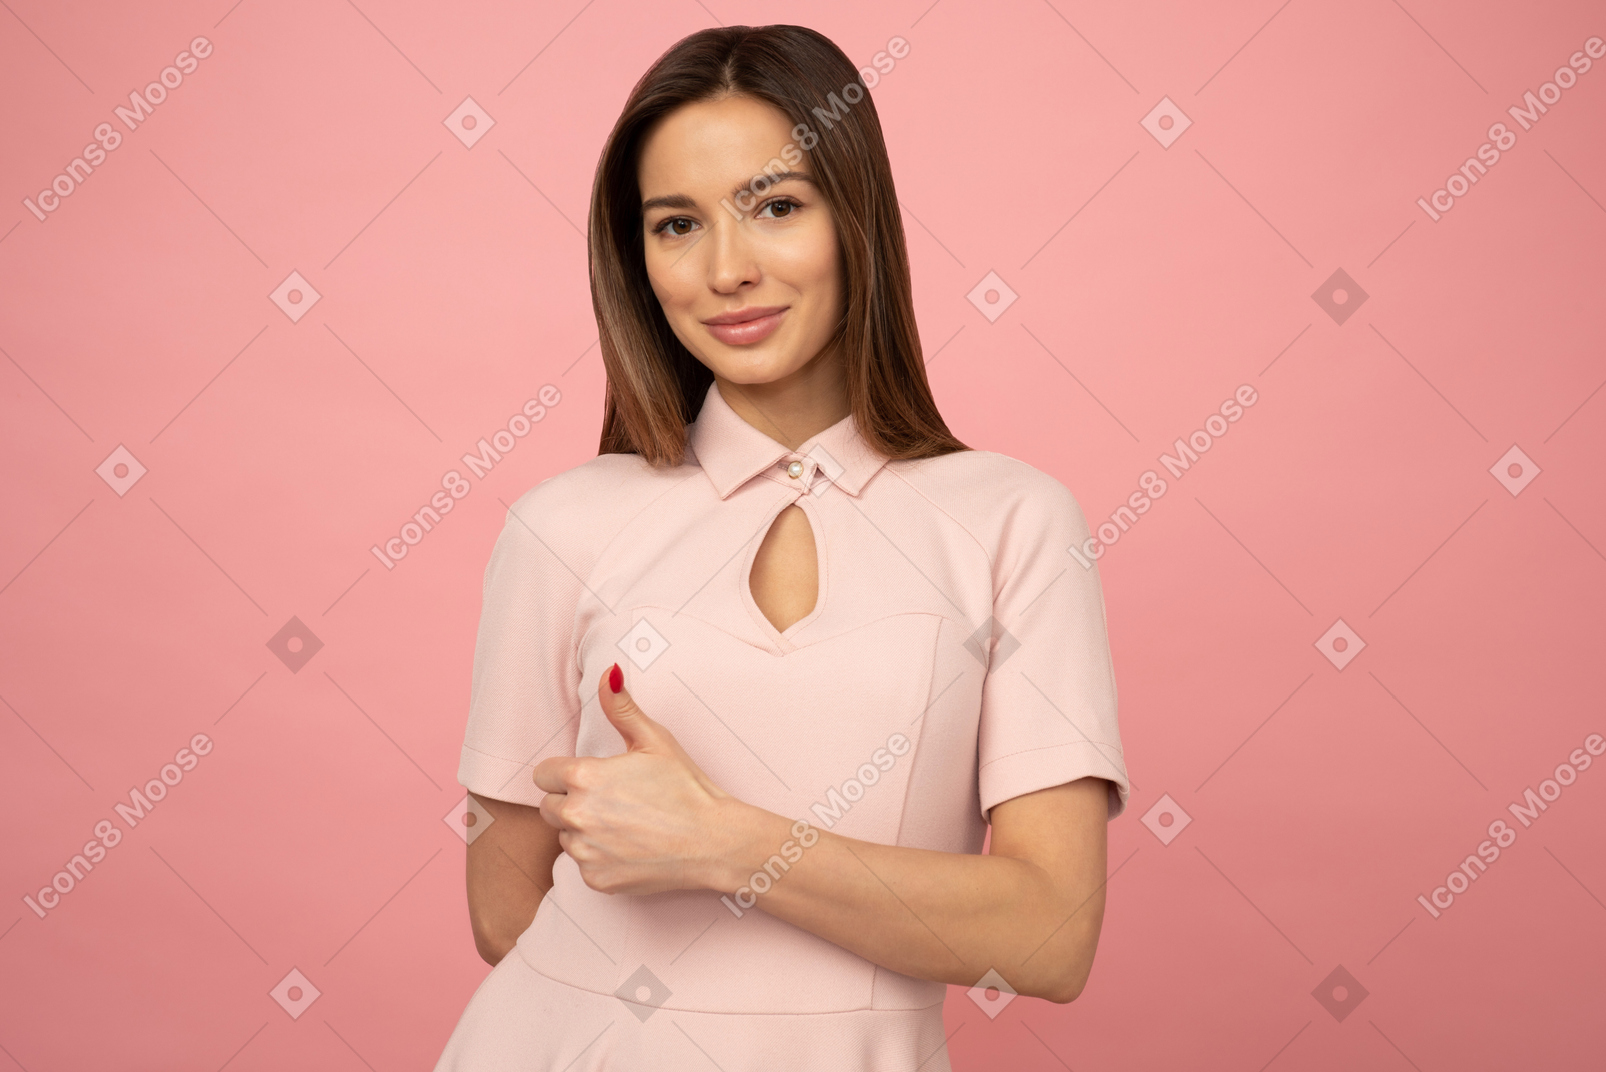 Girl showing a 'thumbs up' gesture